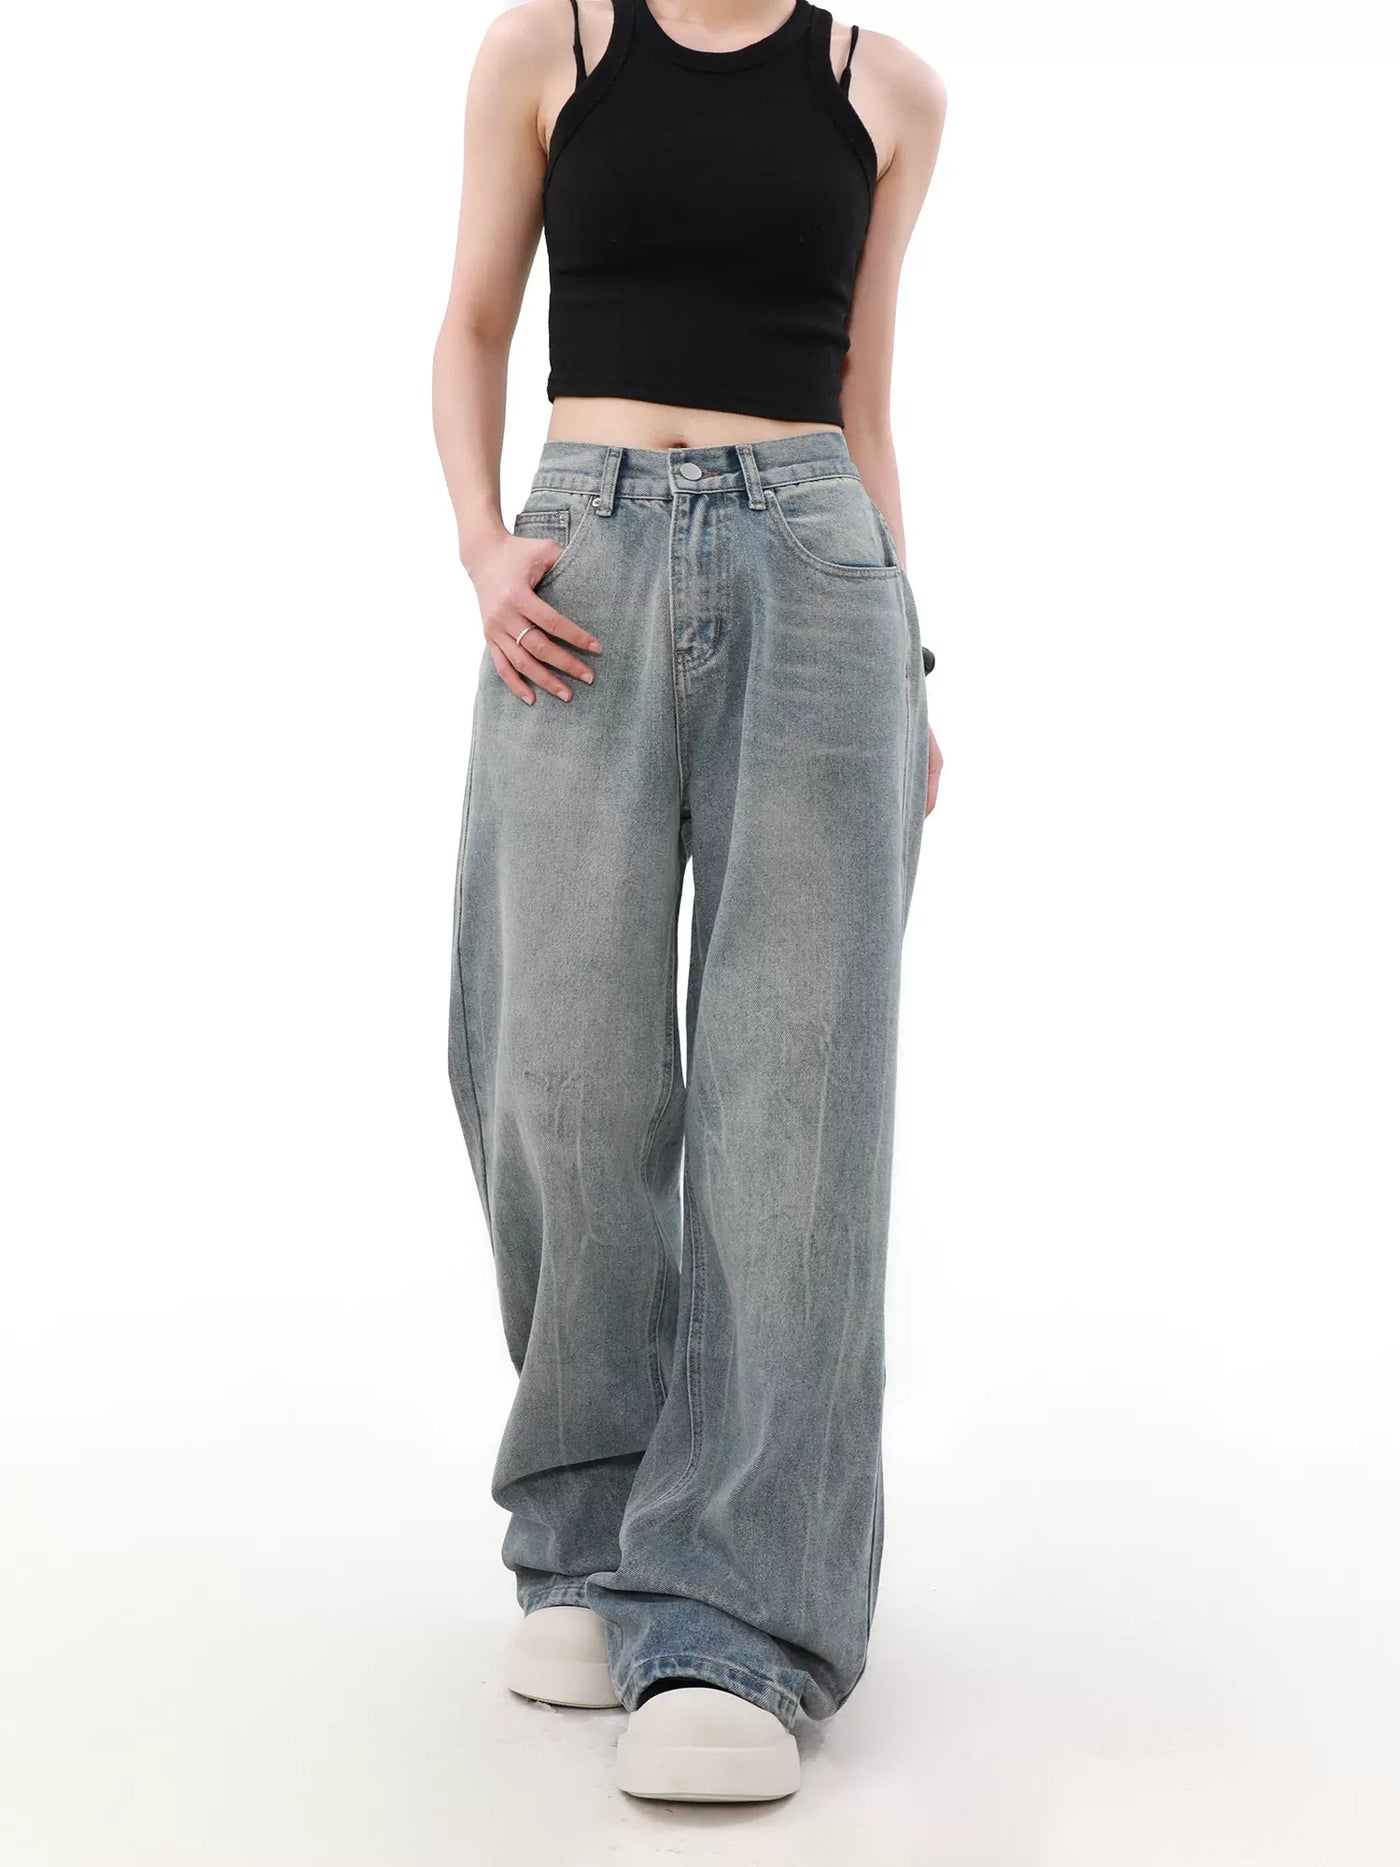 Subtle Lines Washed Jeans Korean Street Fashion Jeans By Mr Nearly Shop Online at OH Vault